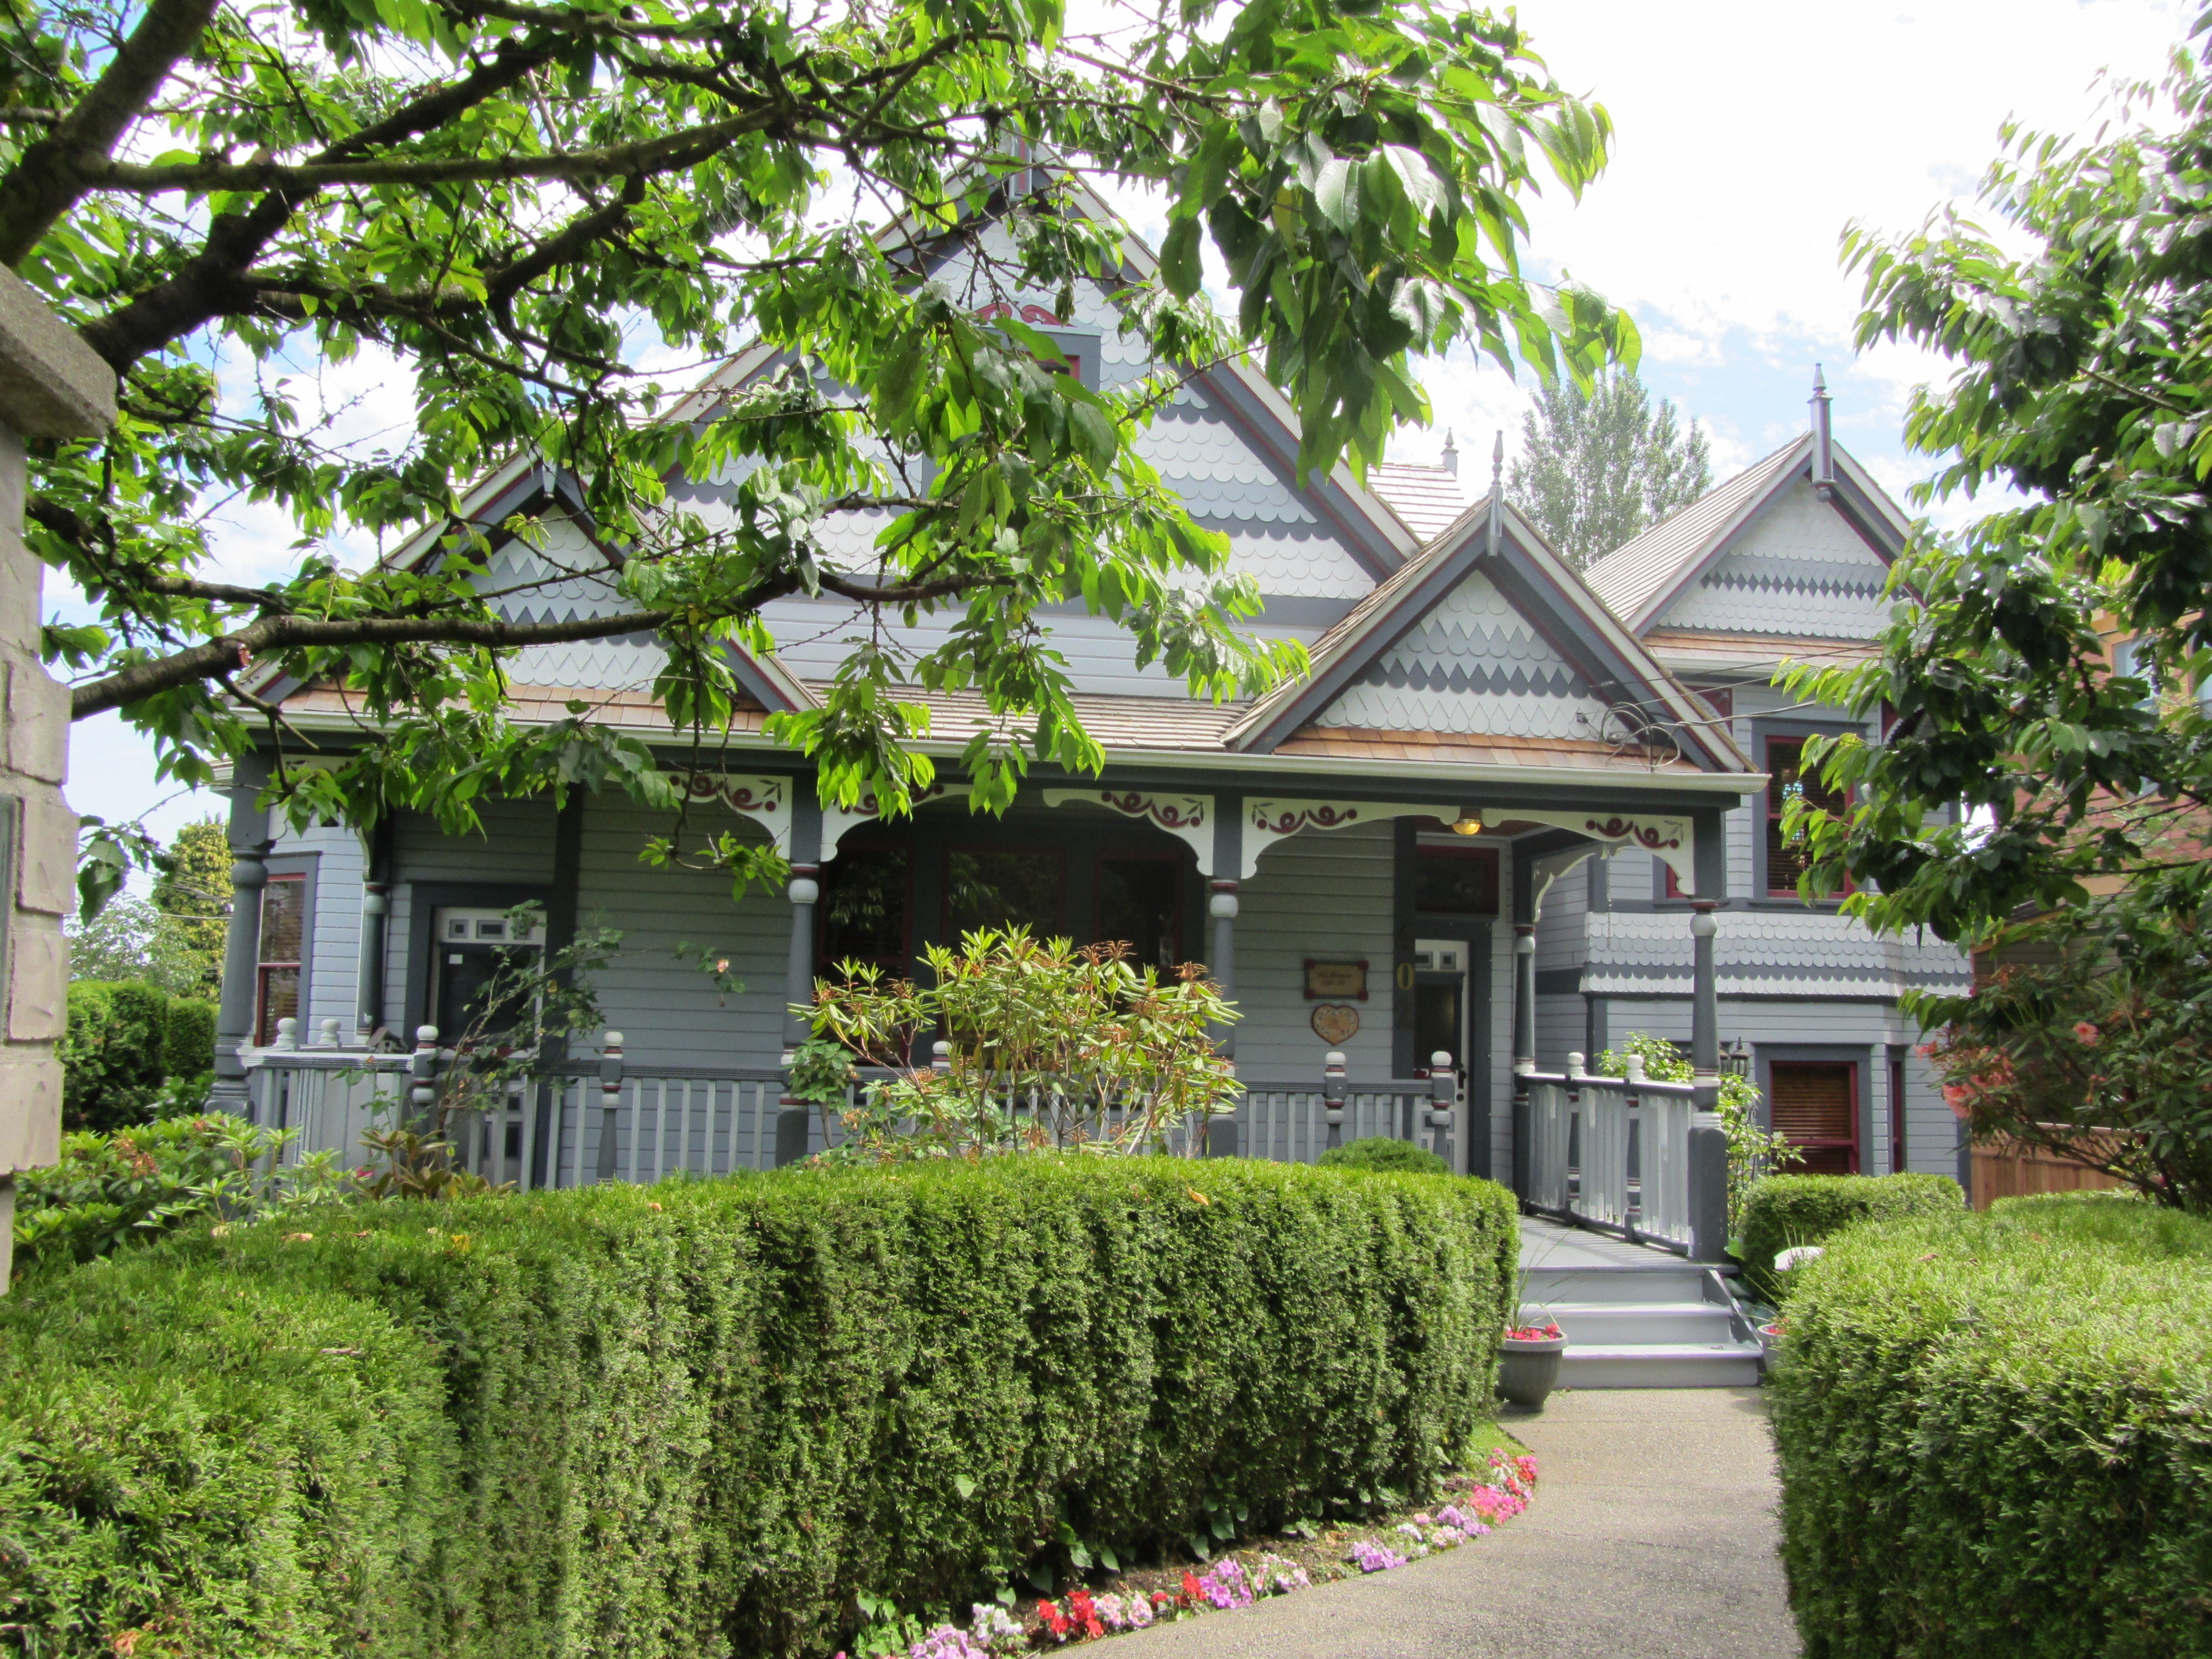 Heritage Home in the neighbourhood of Queen's Park, New Westminster BC